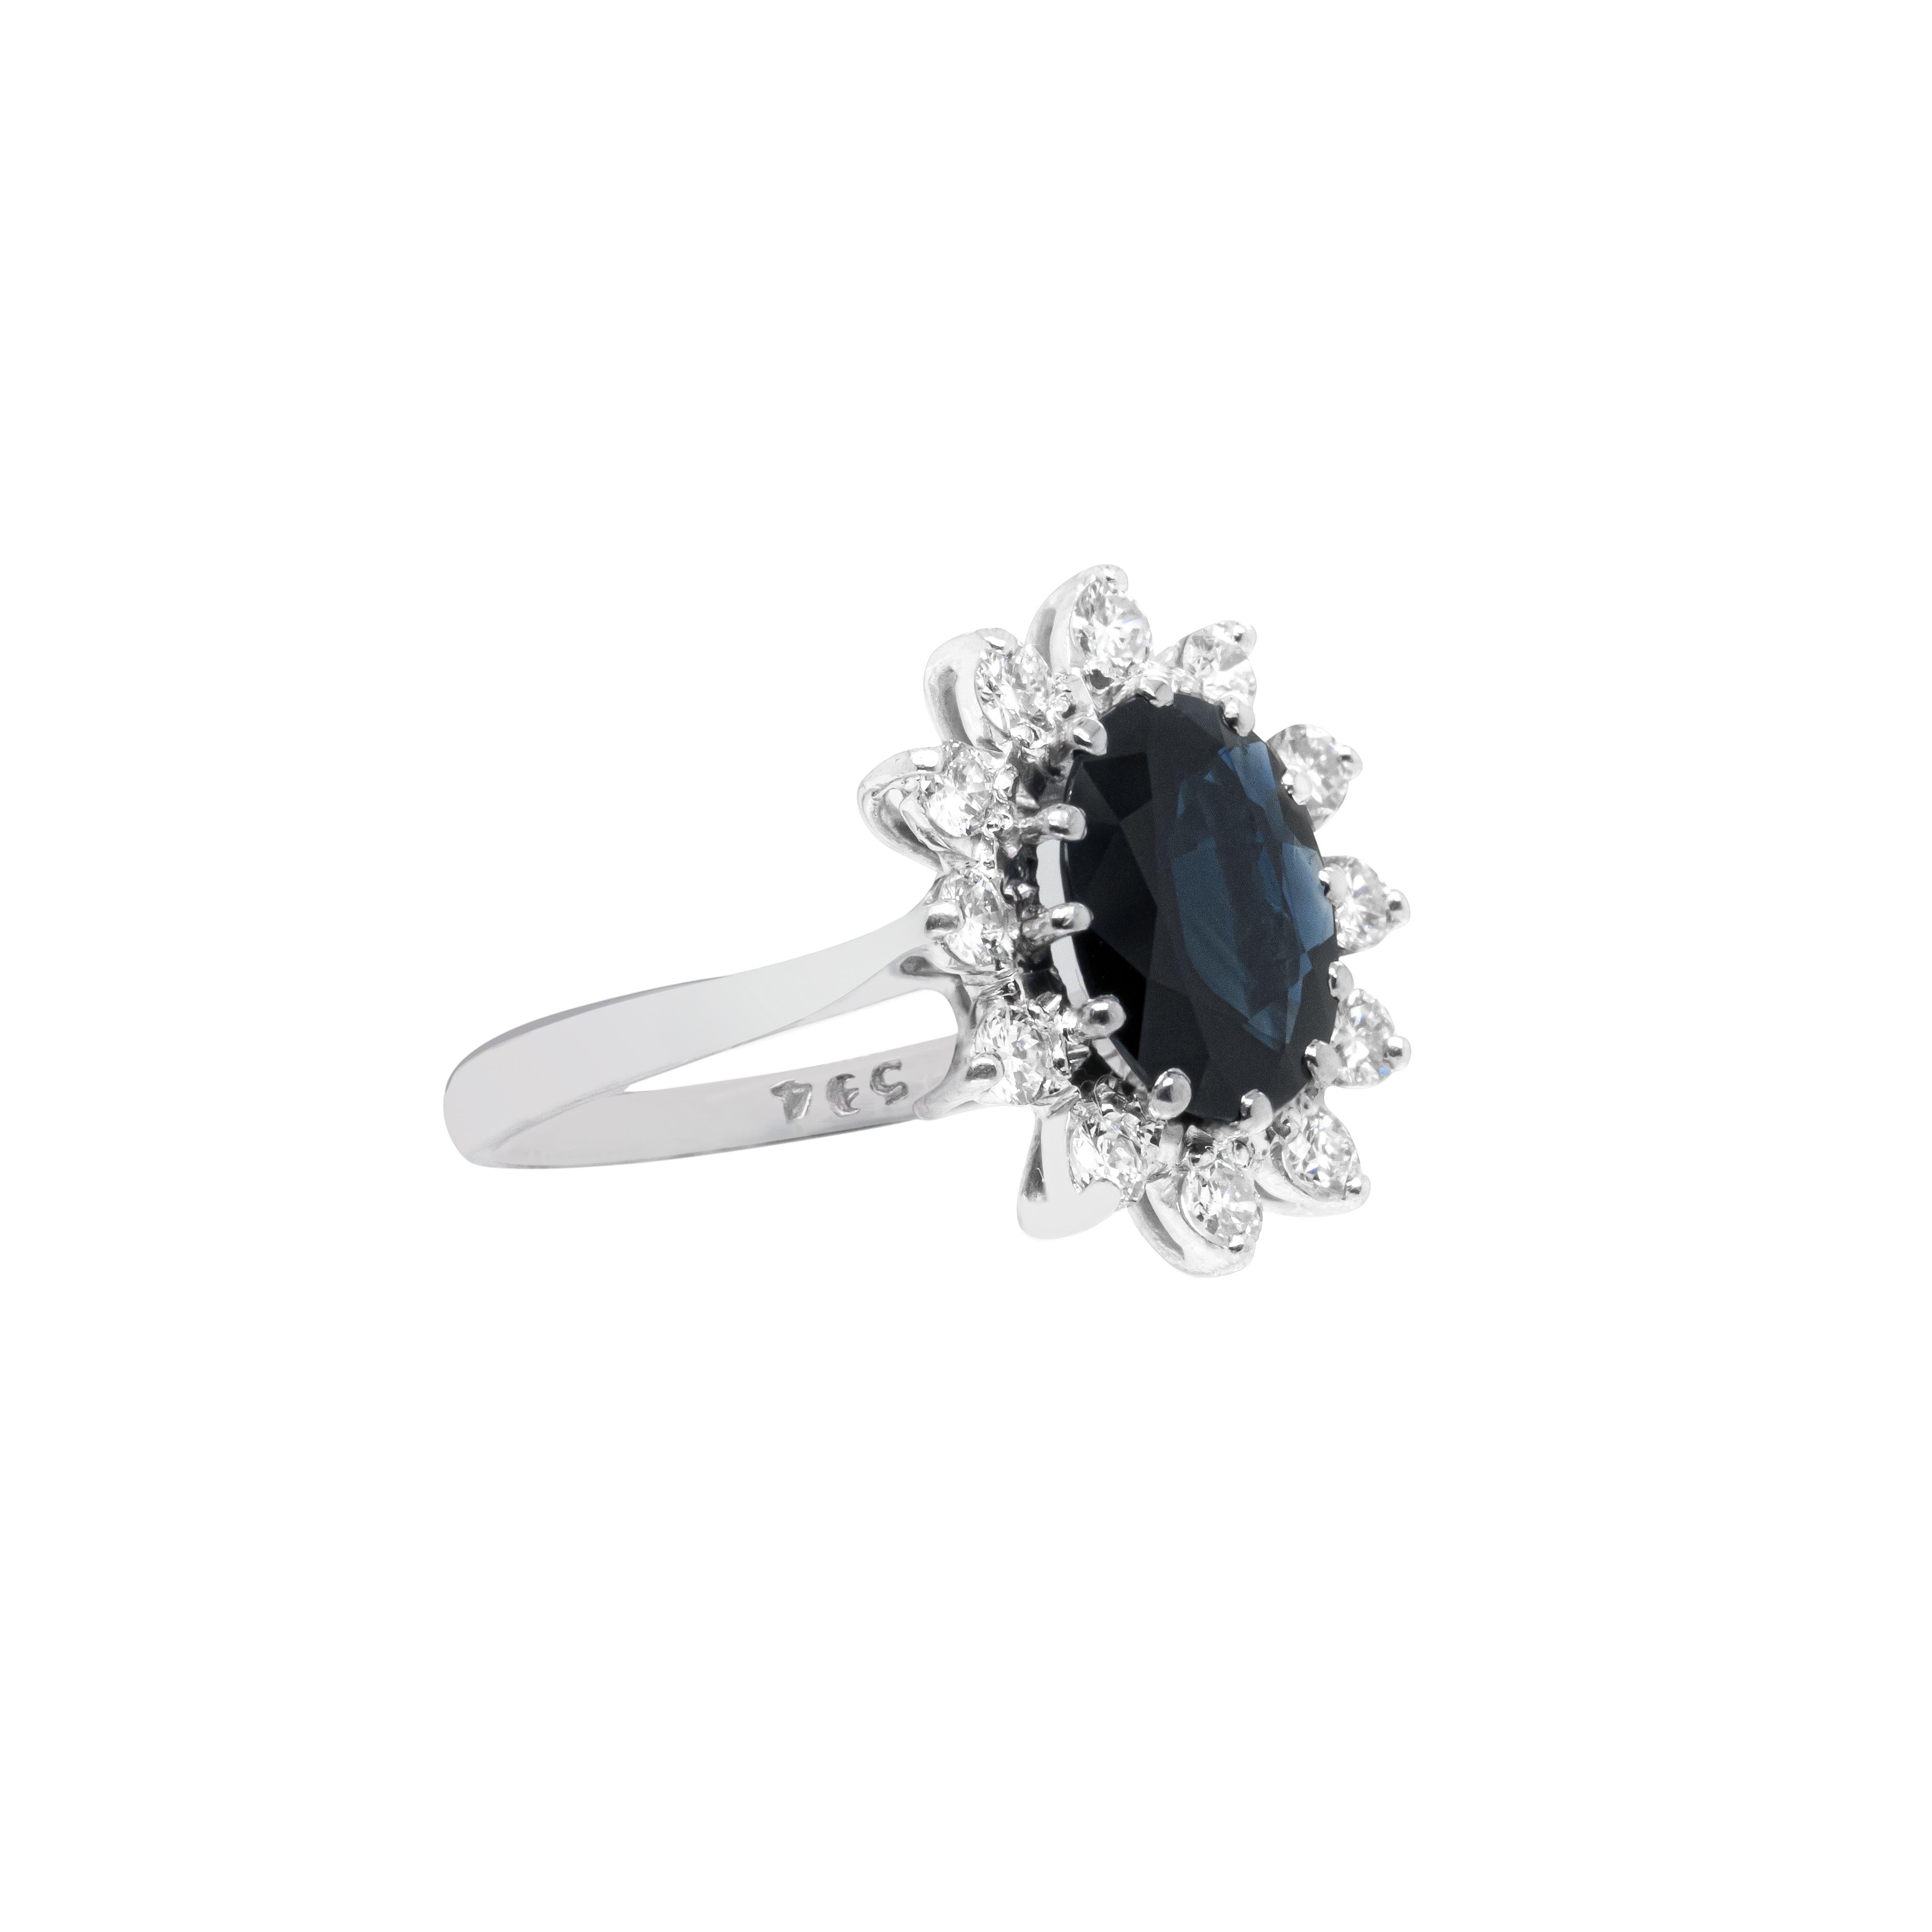 Reminiscent of the Princess Diana cluster engagement ring, this beautiful piece features a dark blue oval sapphire in the centre weighing approximately 2.50 carats mounted in a 12 claw, open back setting. The sapphire is wonderfully surrounded by 12